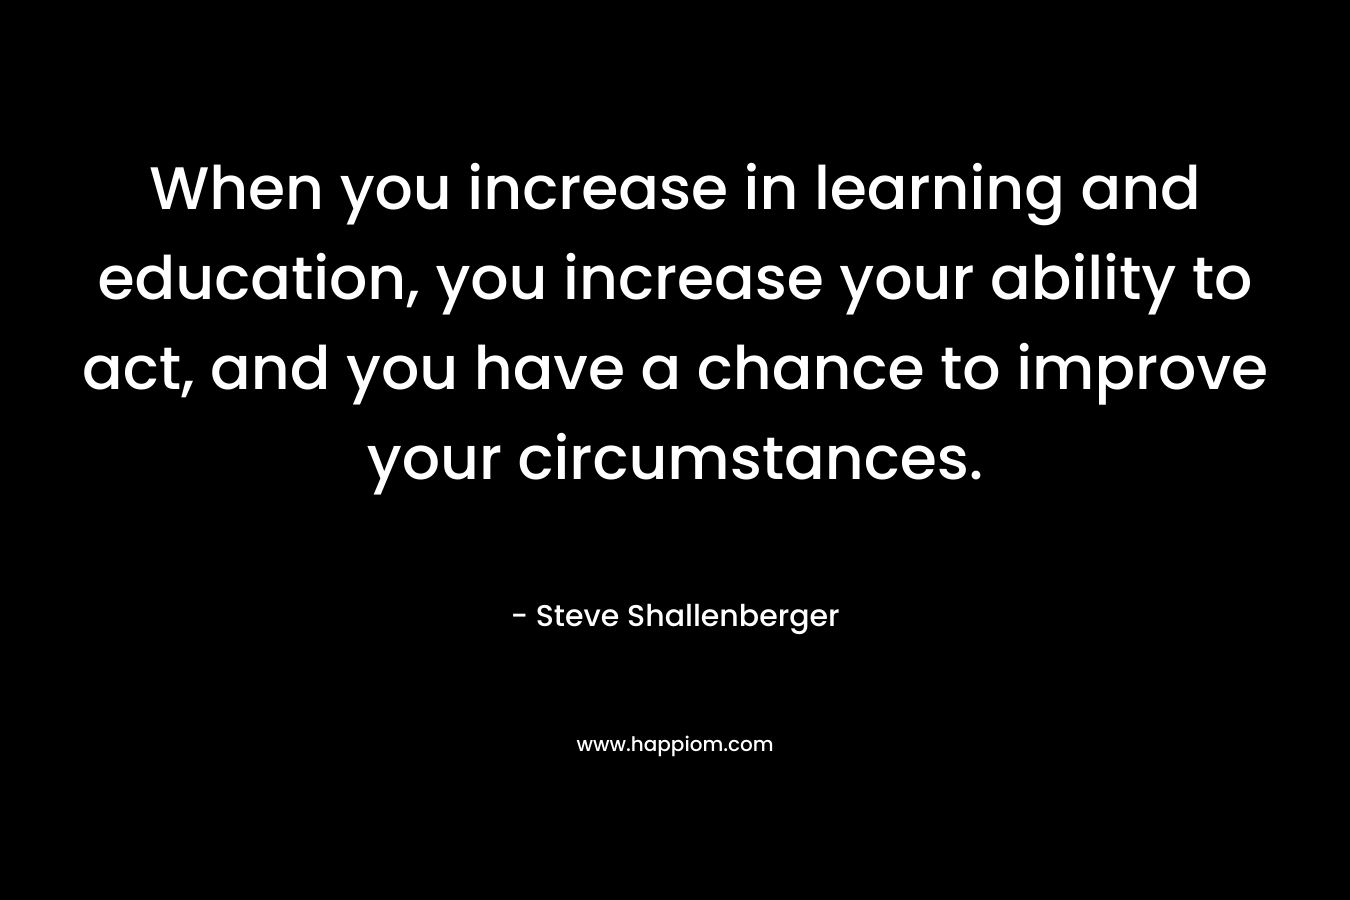 When you increase in learning and education, you increase your ability to act, and you have a chance to improve your circumstances.